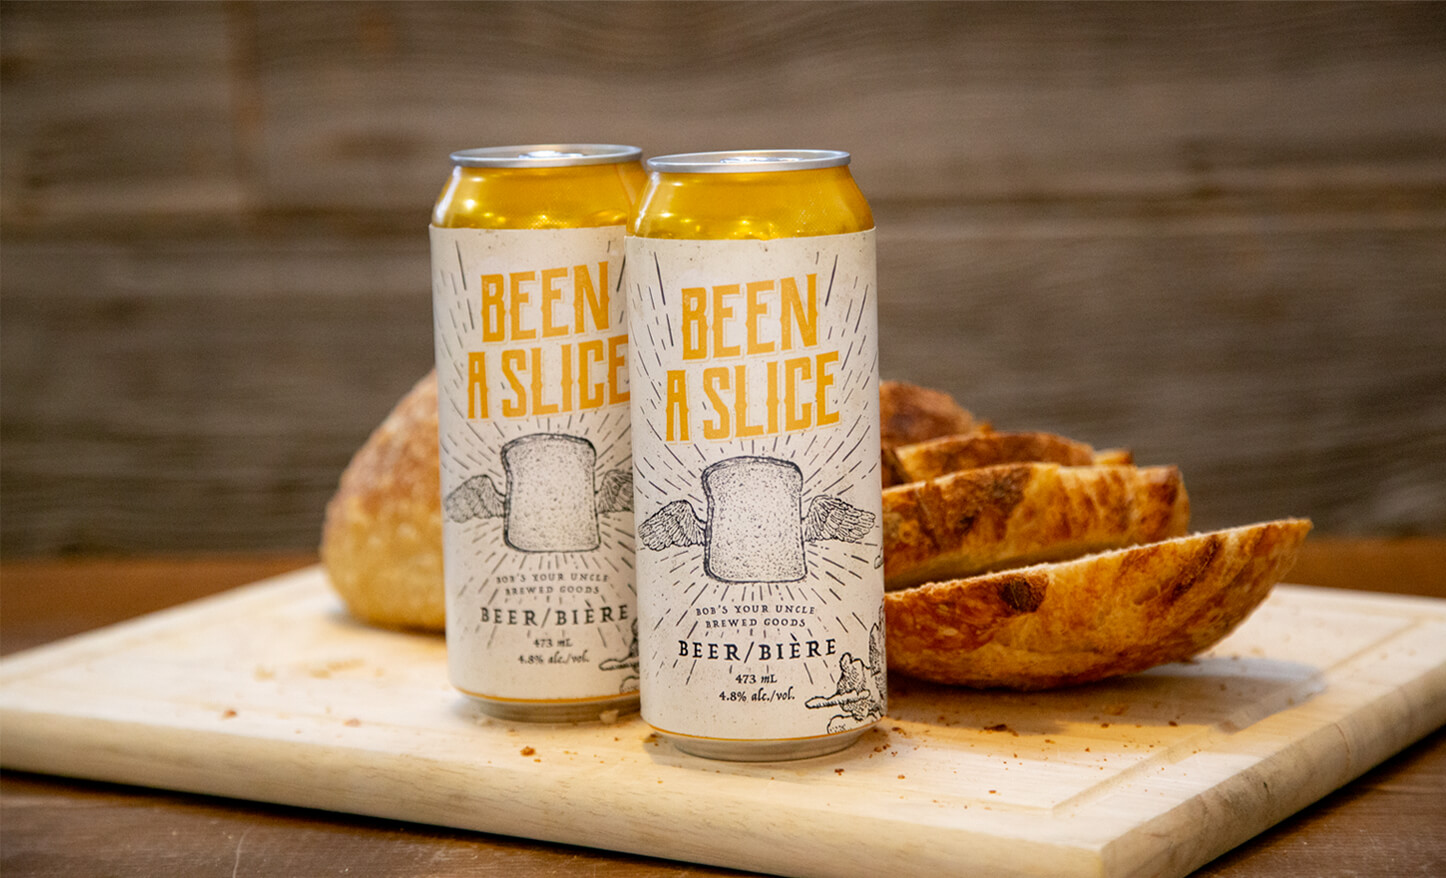 Two cans of Been A Slice beer on a bread board with bread slices in the background.